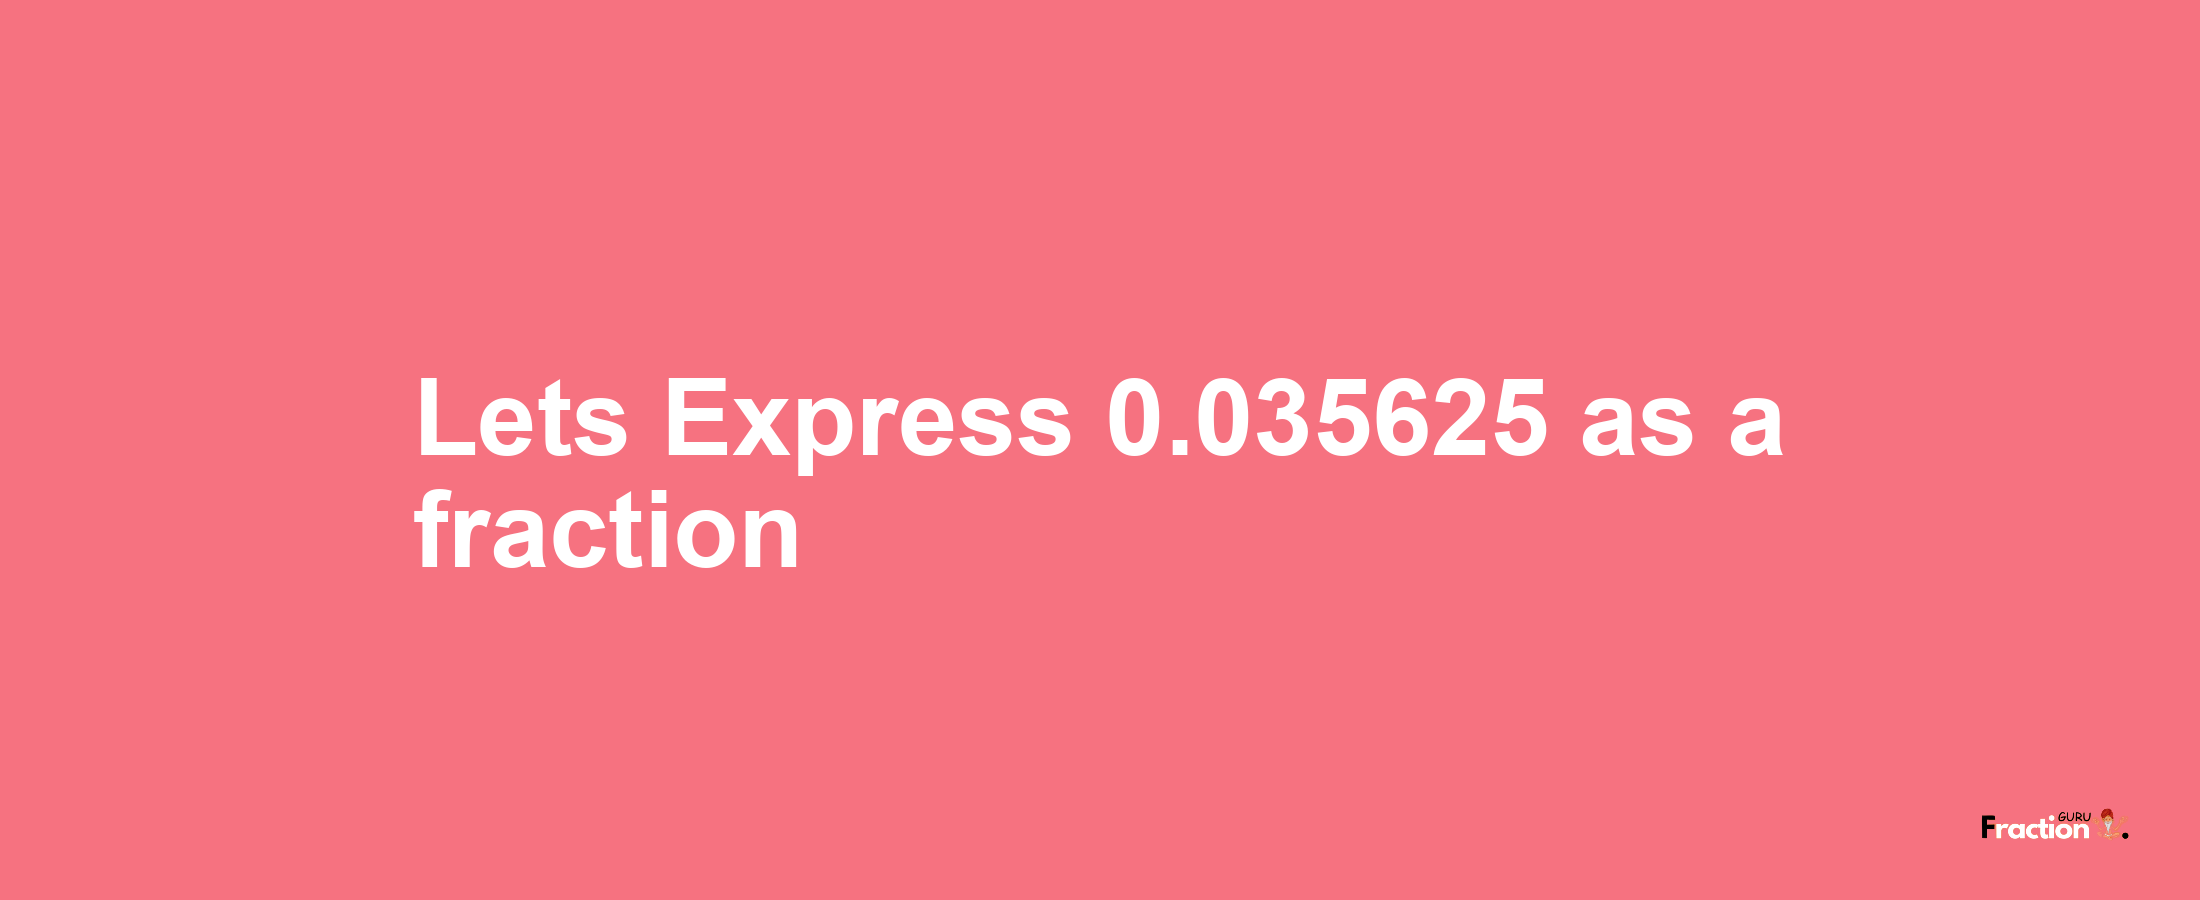 Lets Express 0.035625 as afraction